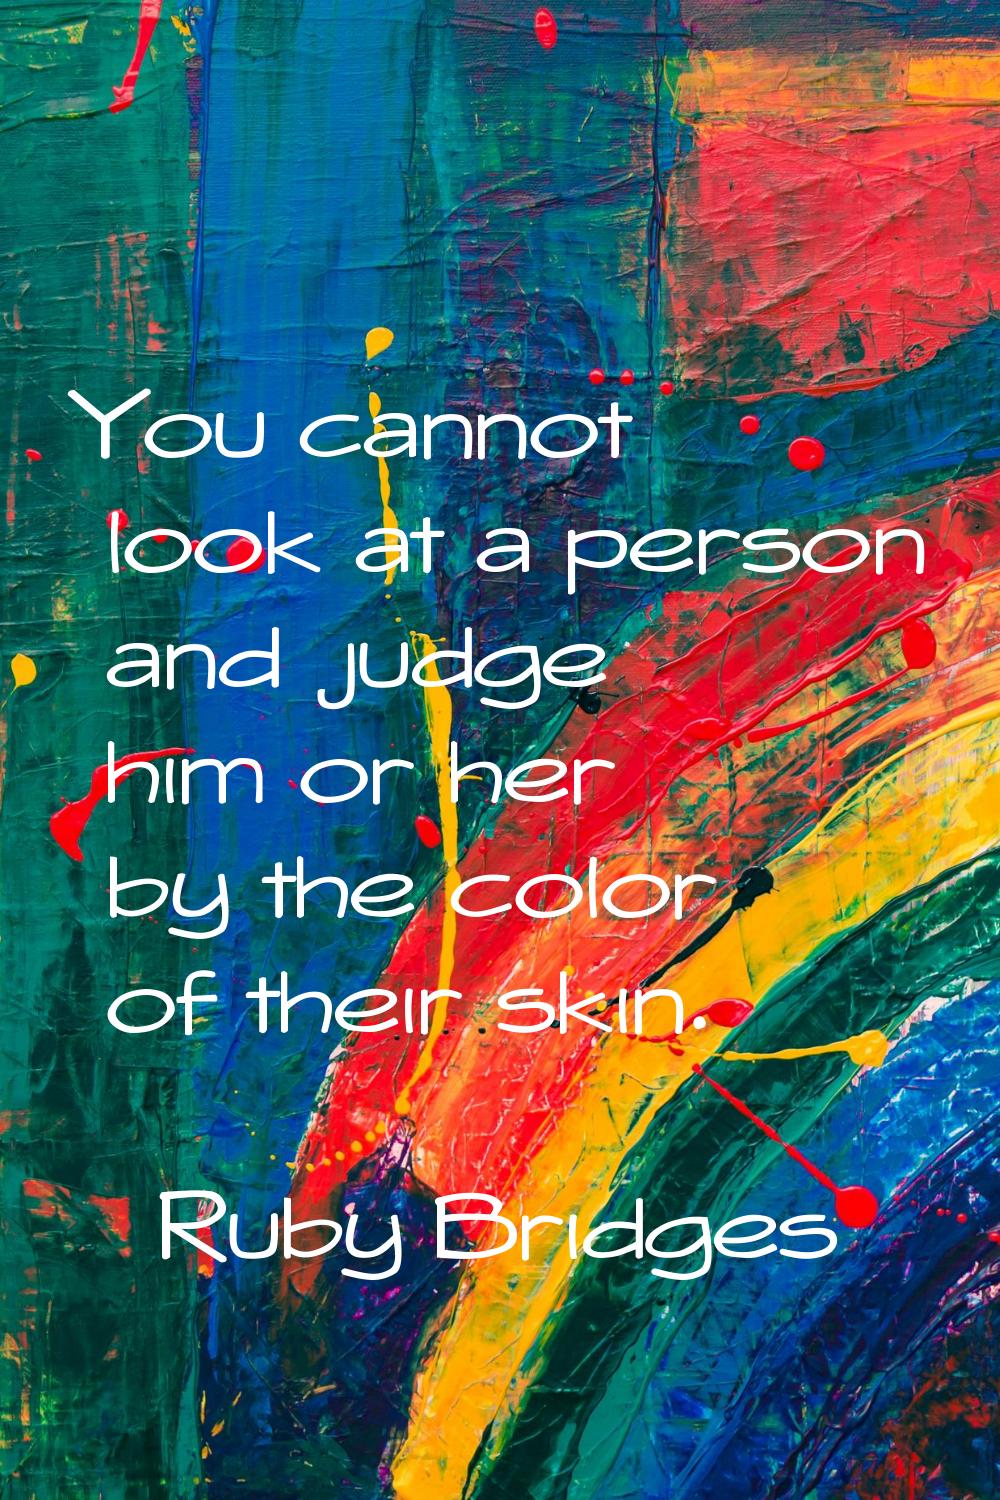 You cannot look at a person and judge him or her by the color of their skin.